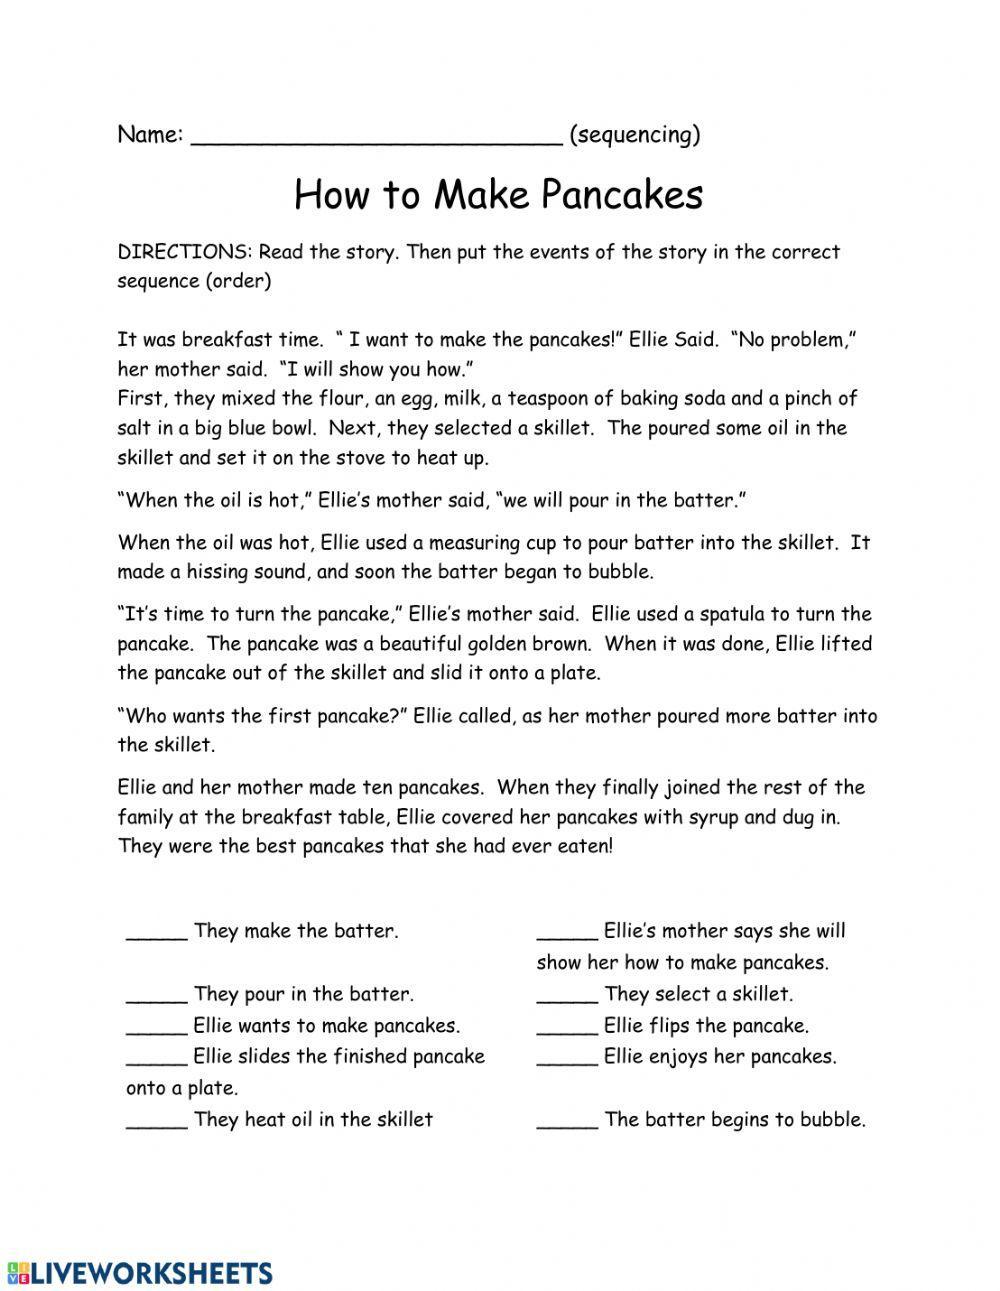 Sequence - How to Make Pancakes